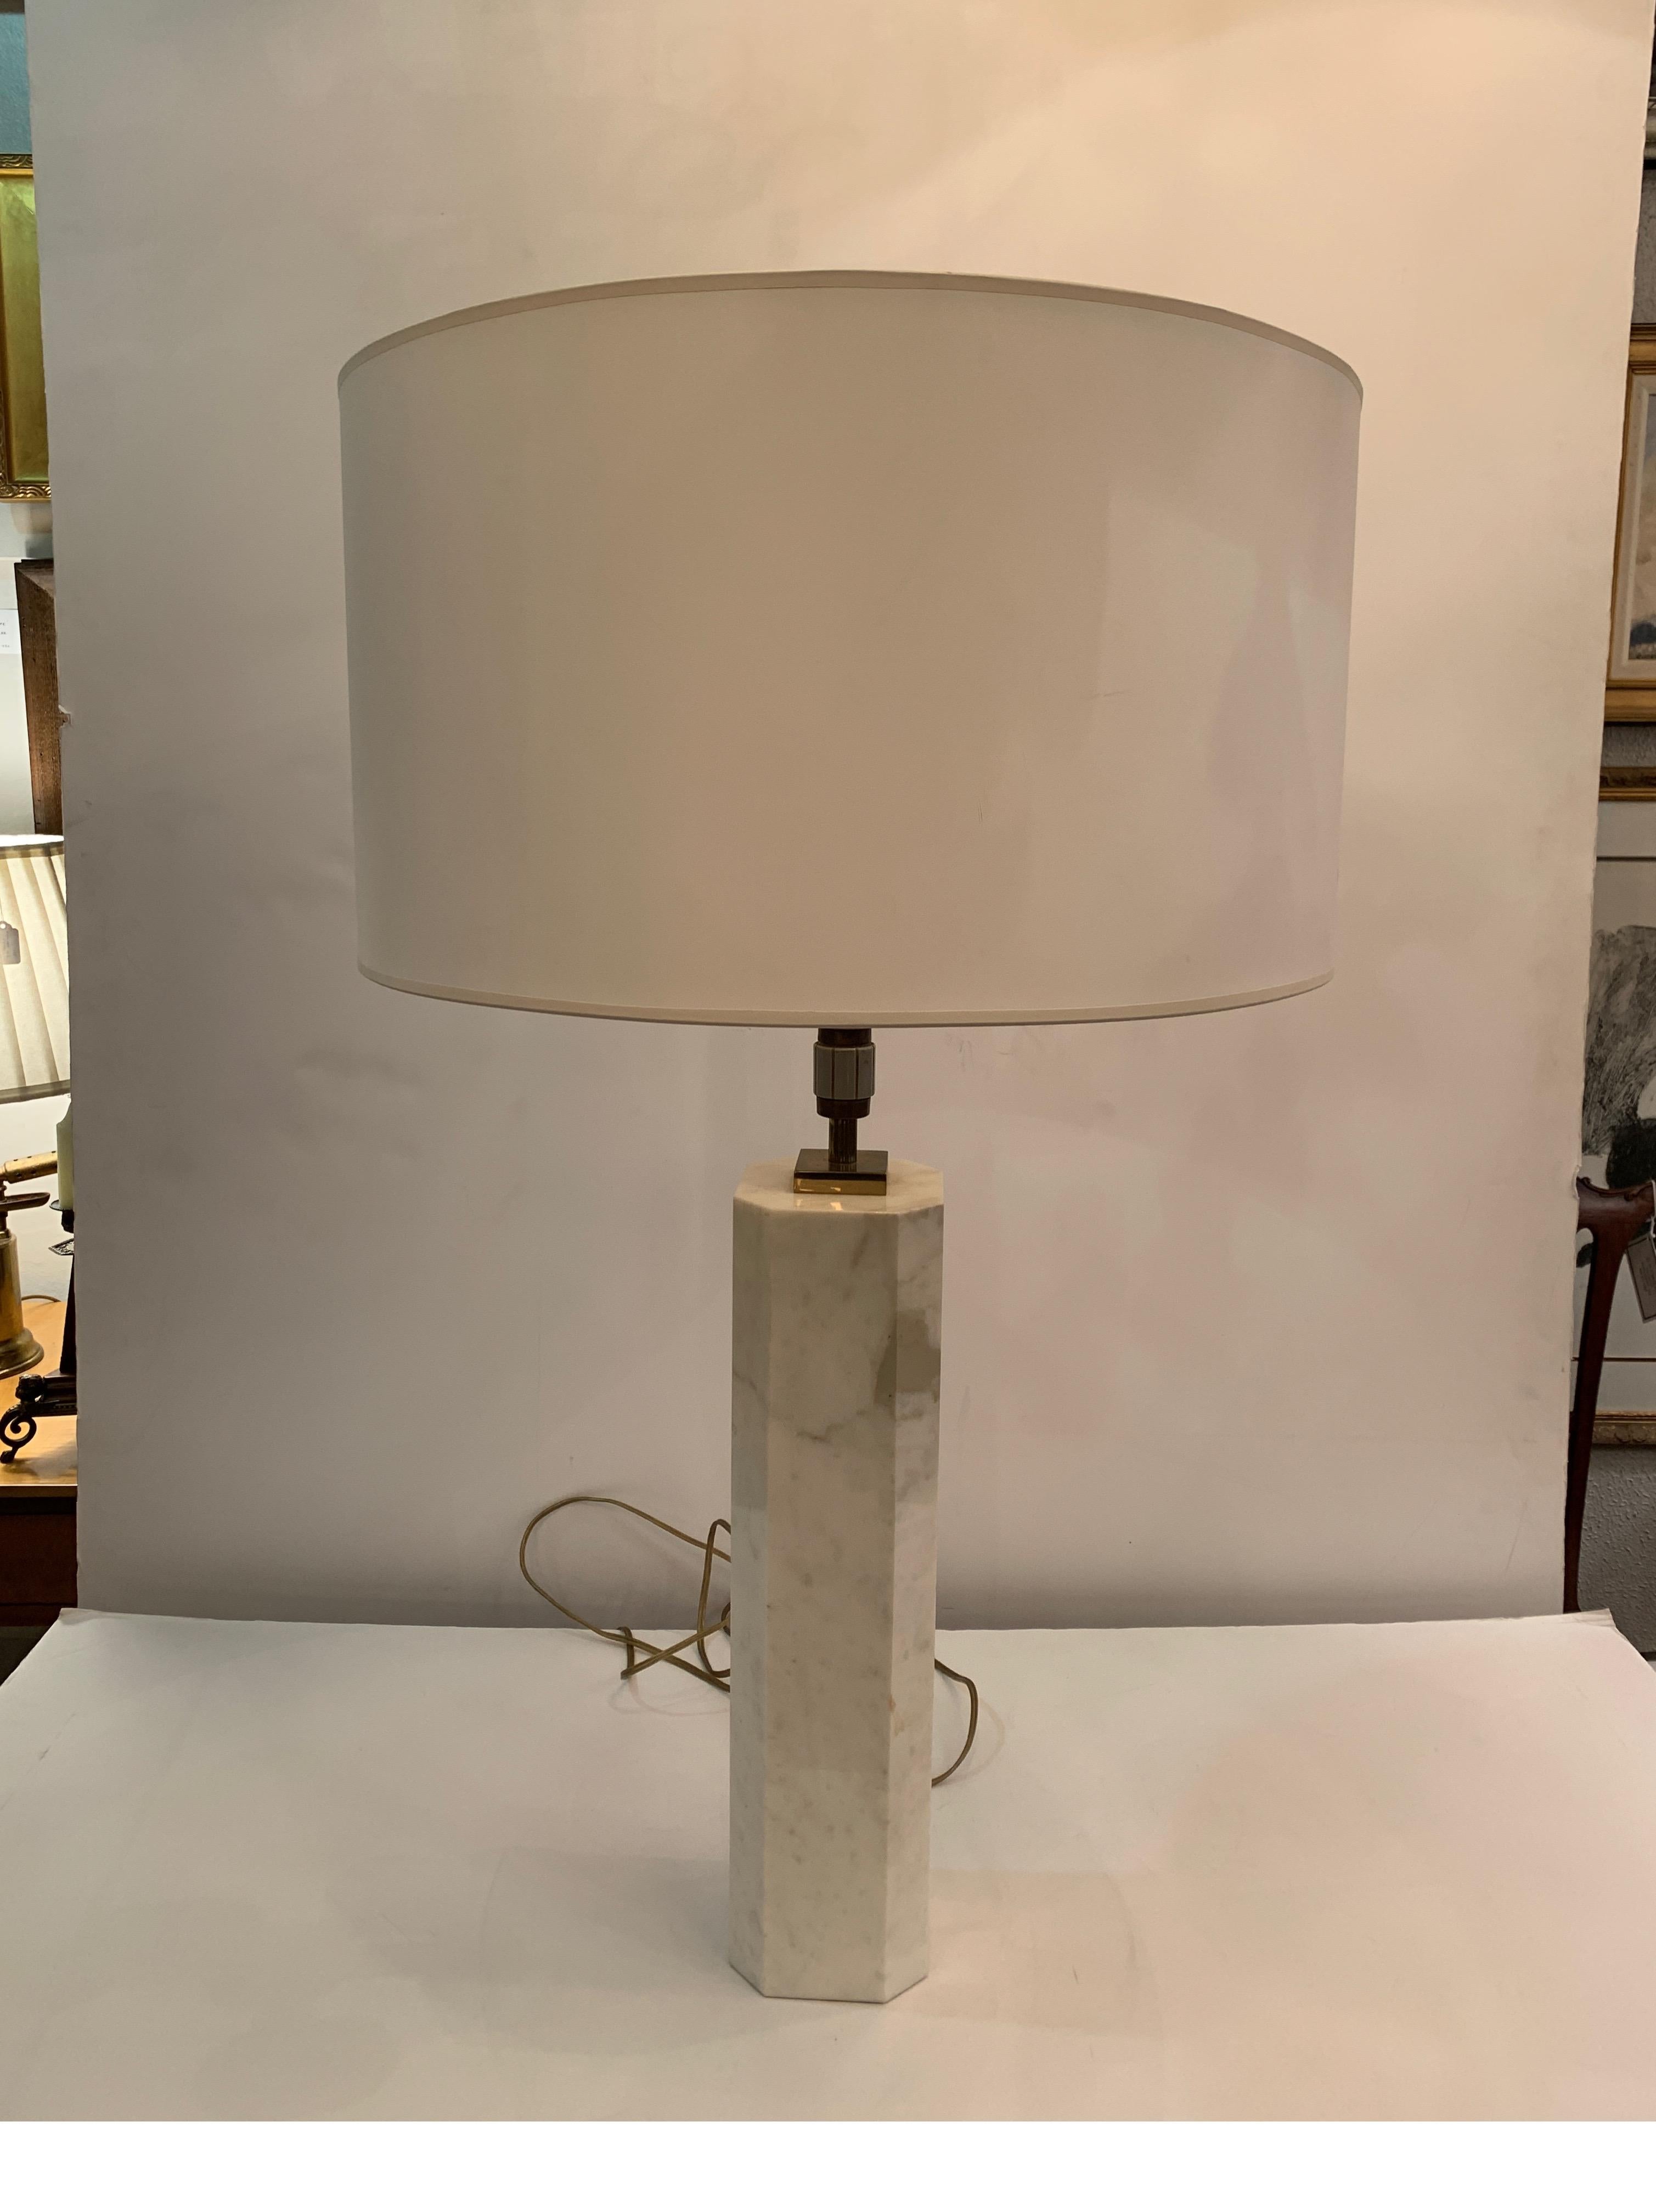 1950s midcentury Carrara marble and brass table lamp by Walter Von Nessen, all original including ceramic sockets and on and off switch on neck. 8 sided
Dimensions: 4.5